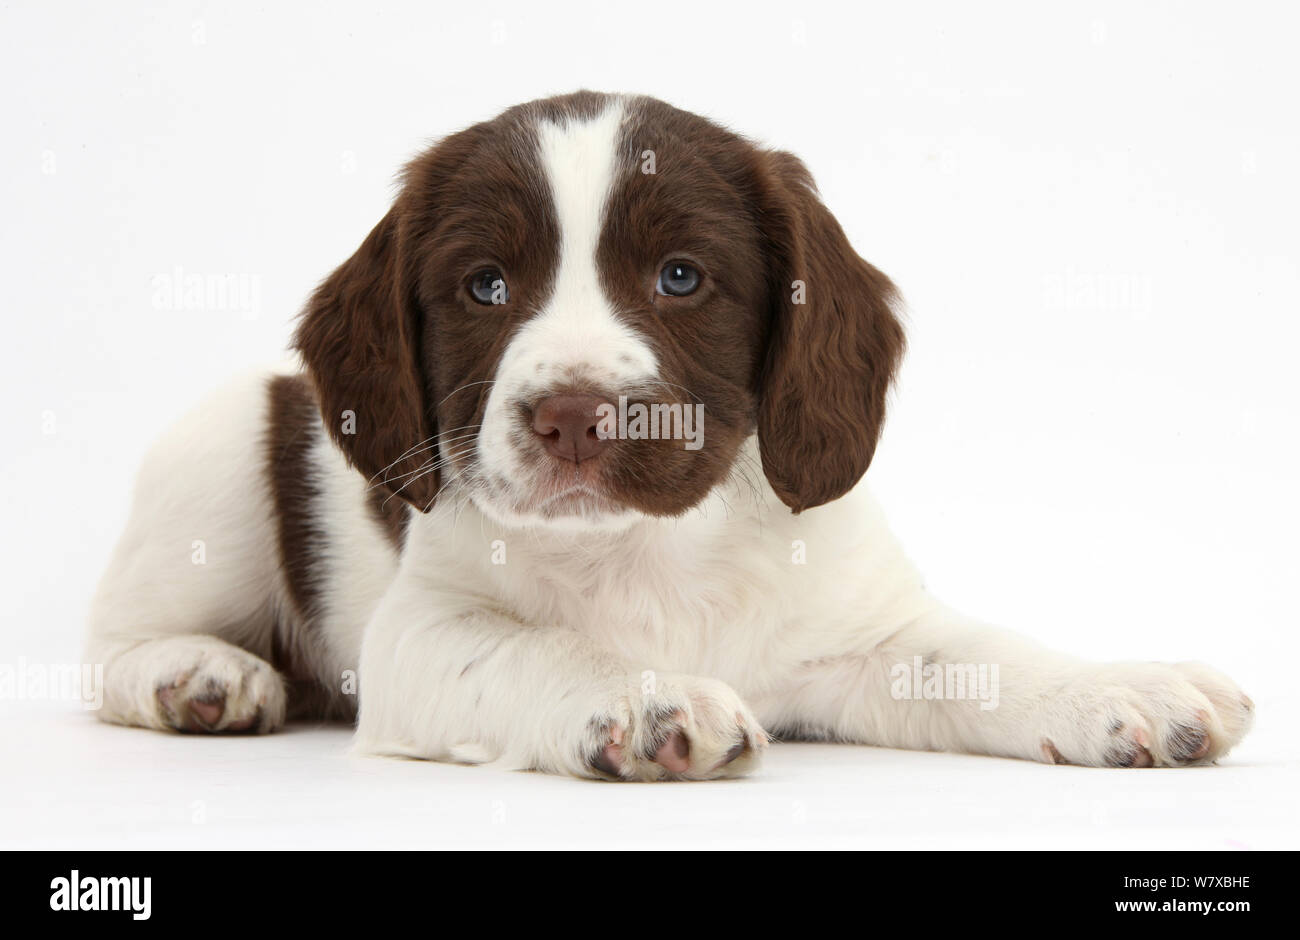 Working English Springer Spaniel puppy, age 6 weeks, lying with head up. Stock Photo